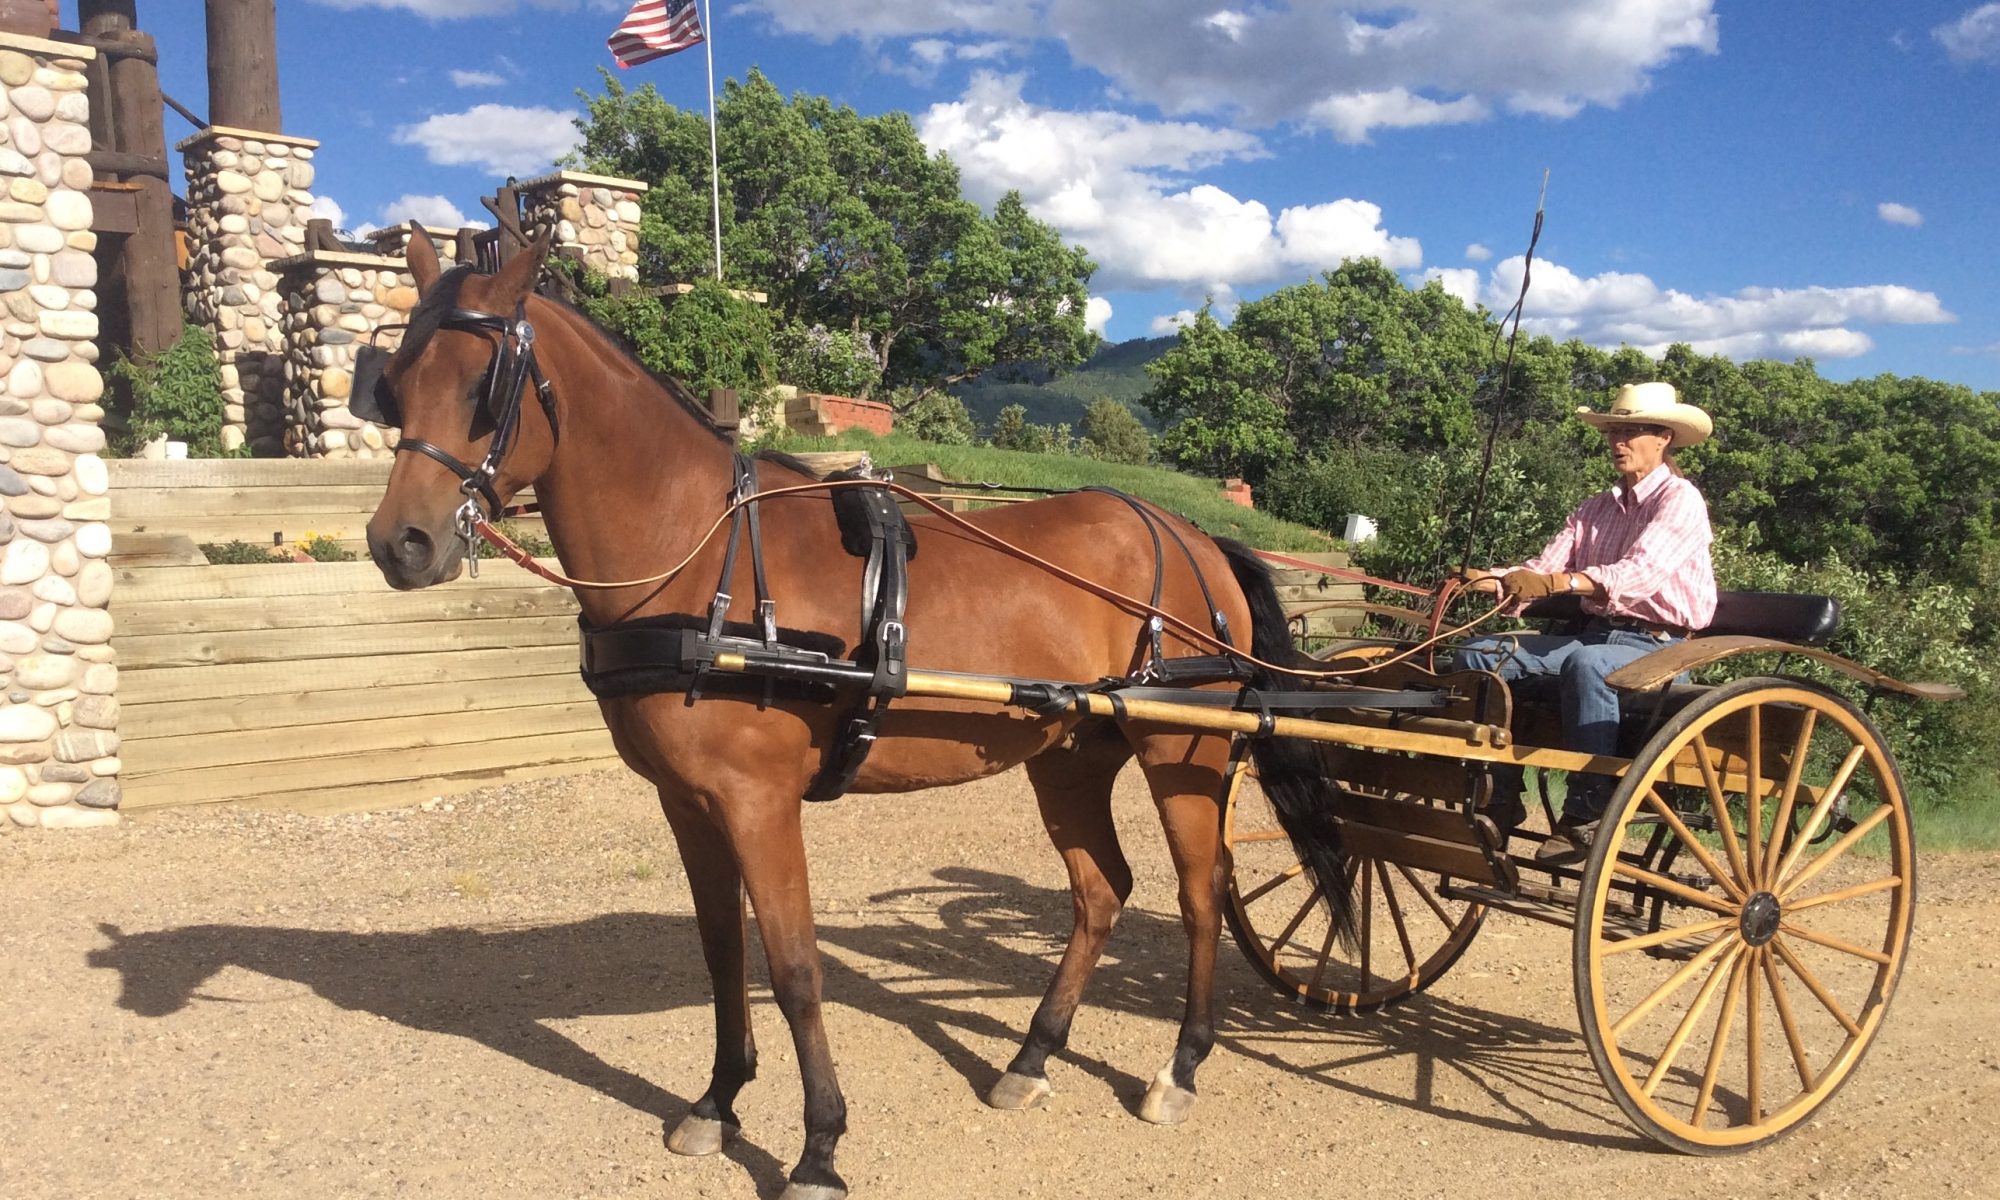 Horse and Carriage at Spring Creek Farm